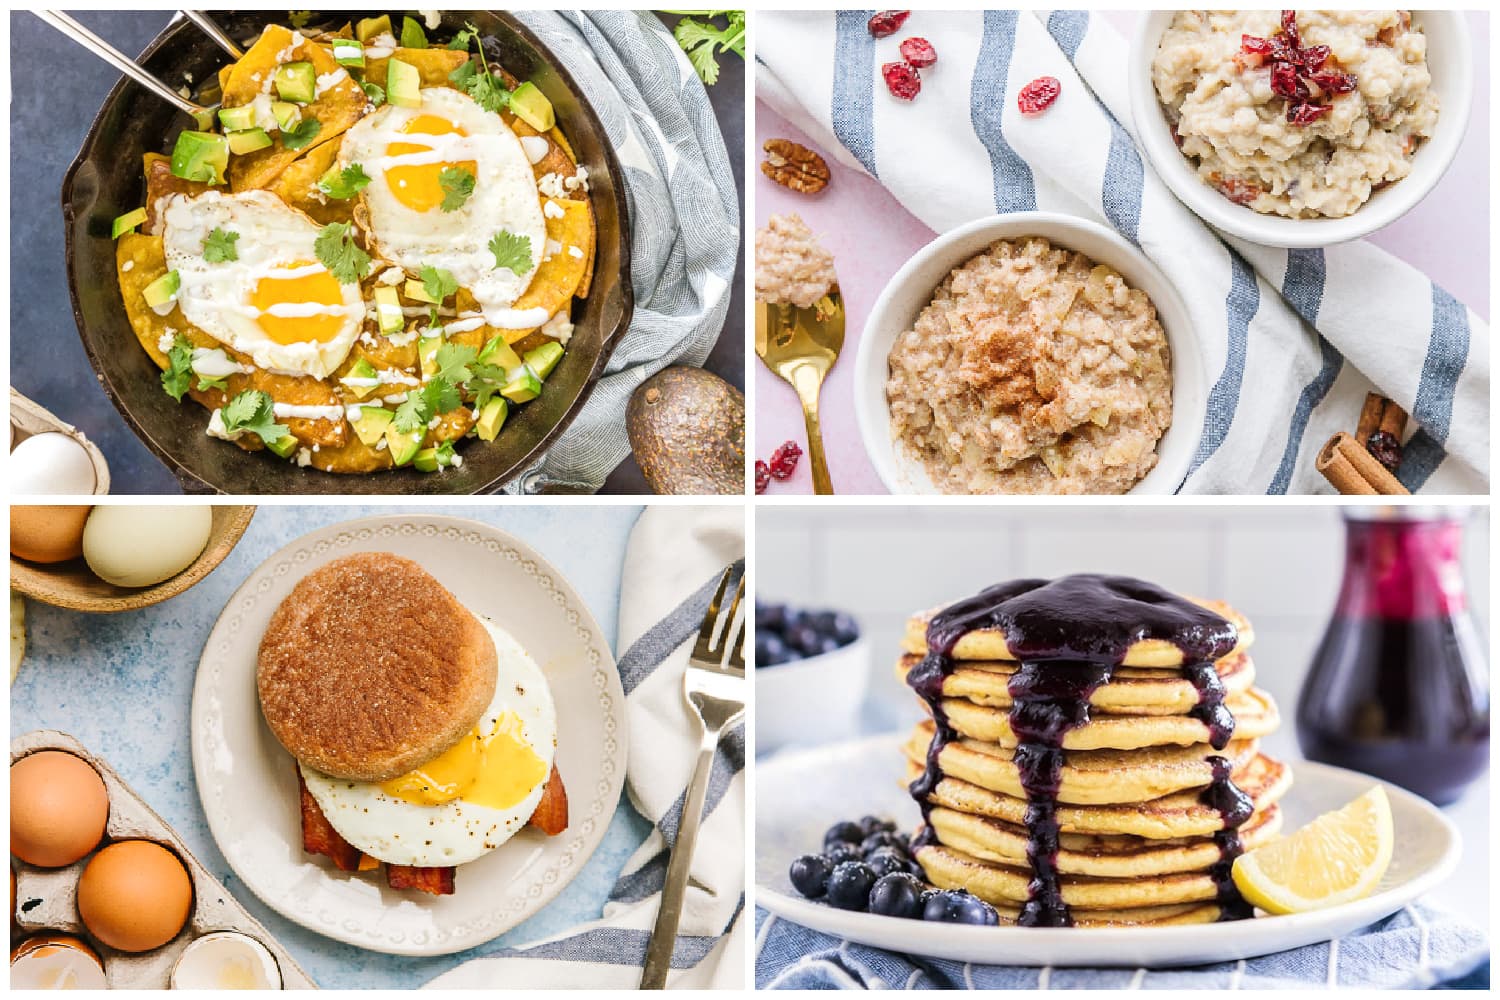 35 Products To Help Make Breakfast Easier And Tastier